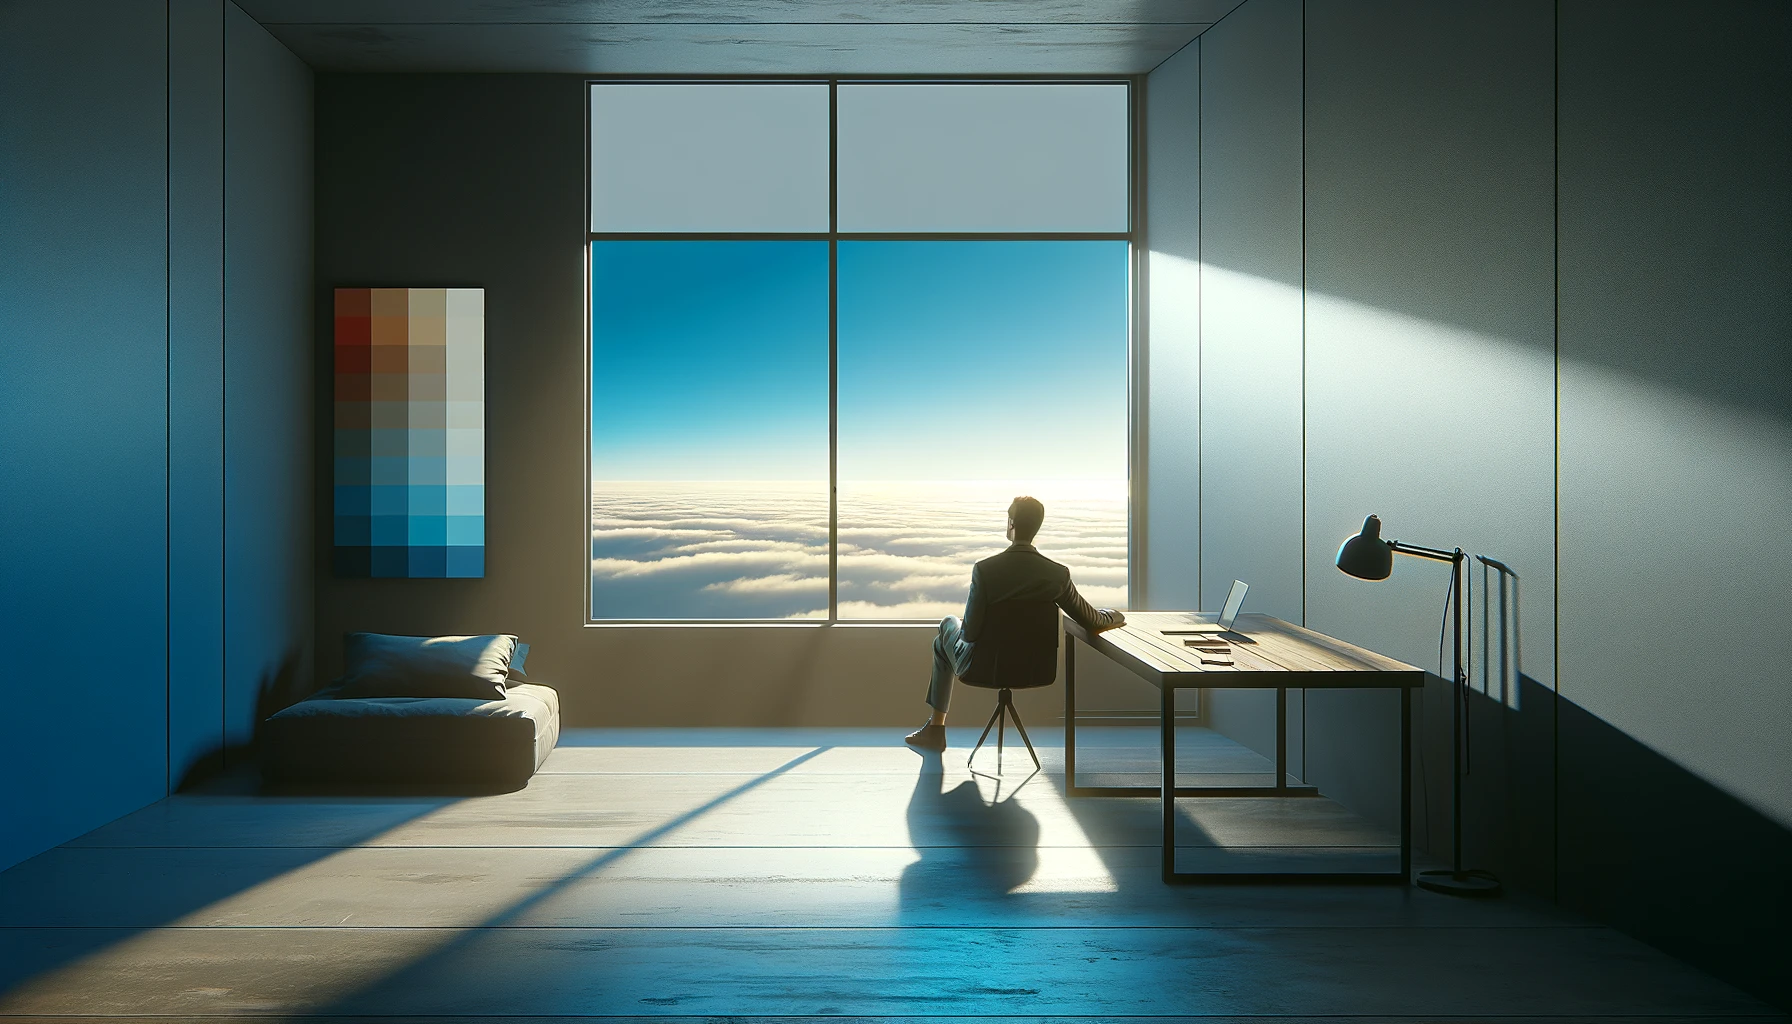 Depicts a contemporary individual in a minimalist room, gazing out at a vast sky transitioning from blue to light gray, symbolizing the move from distraction to introspection. Modern devices are present but unused, emphasizing a deliberate choice for solitude. The individual's contemplative yet uneasy demeanor reflects the struggle and importance of facing one's own thoughts.